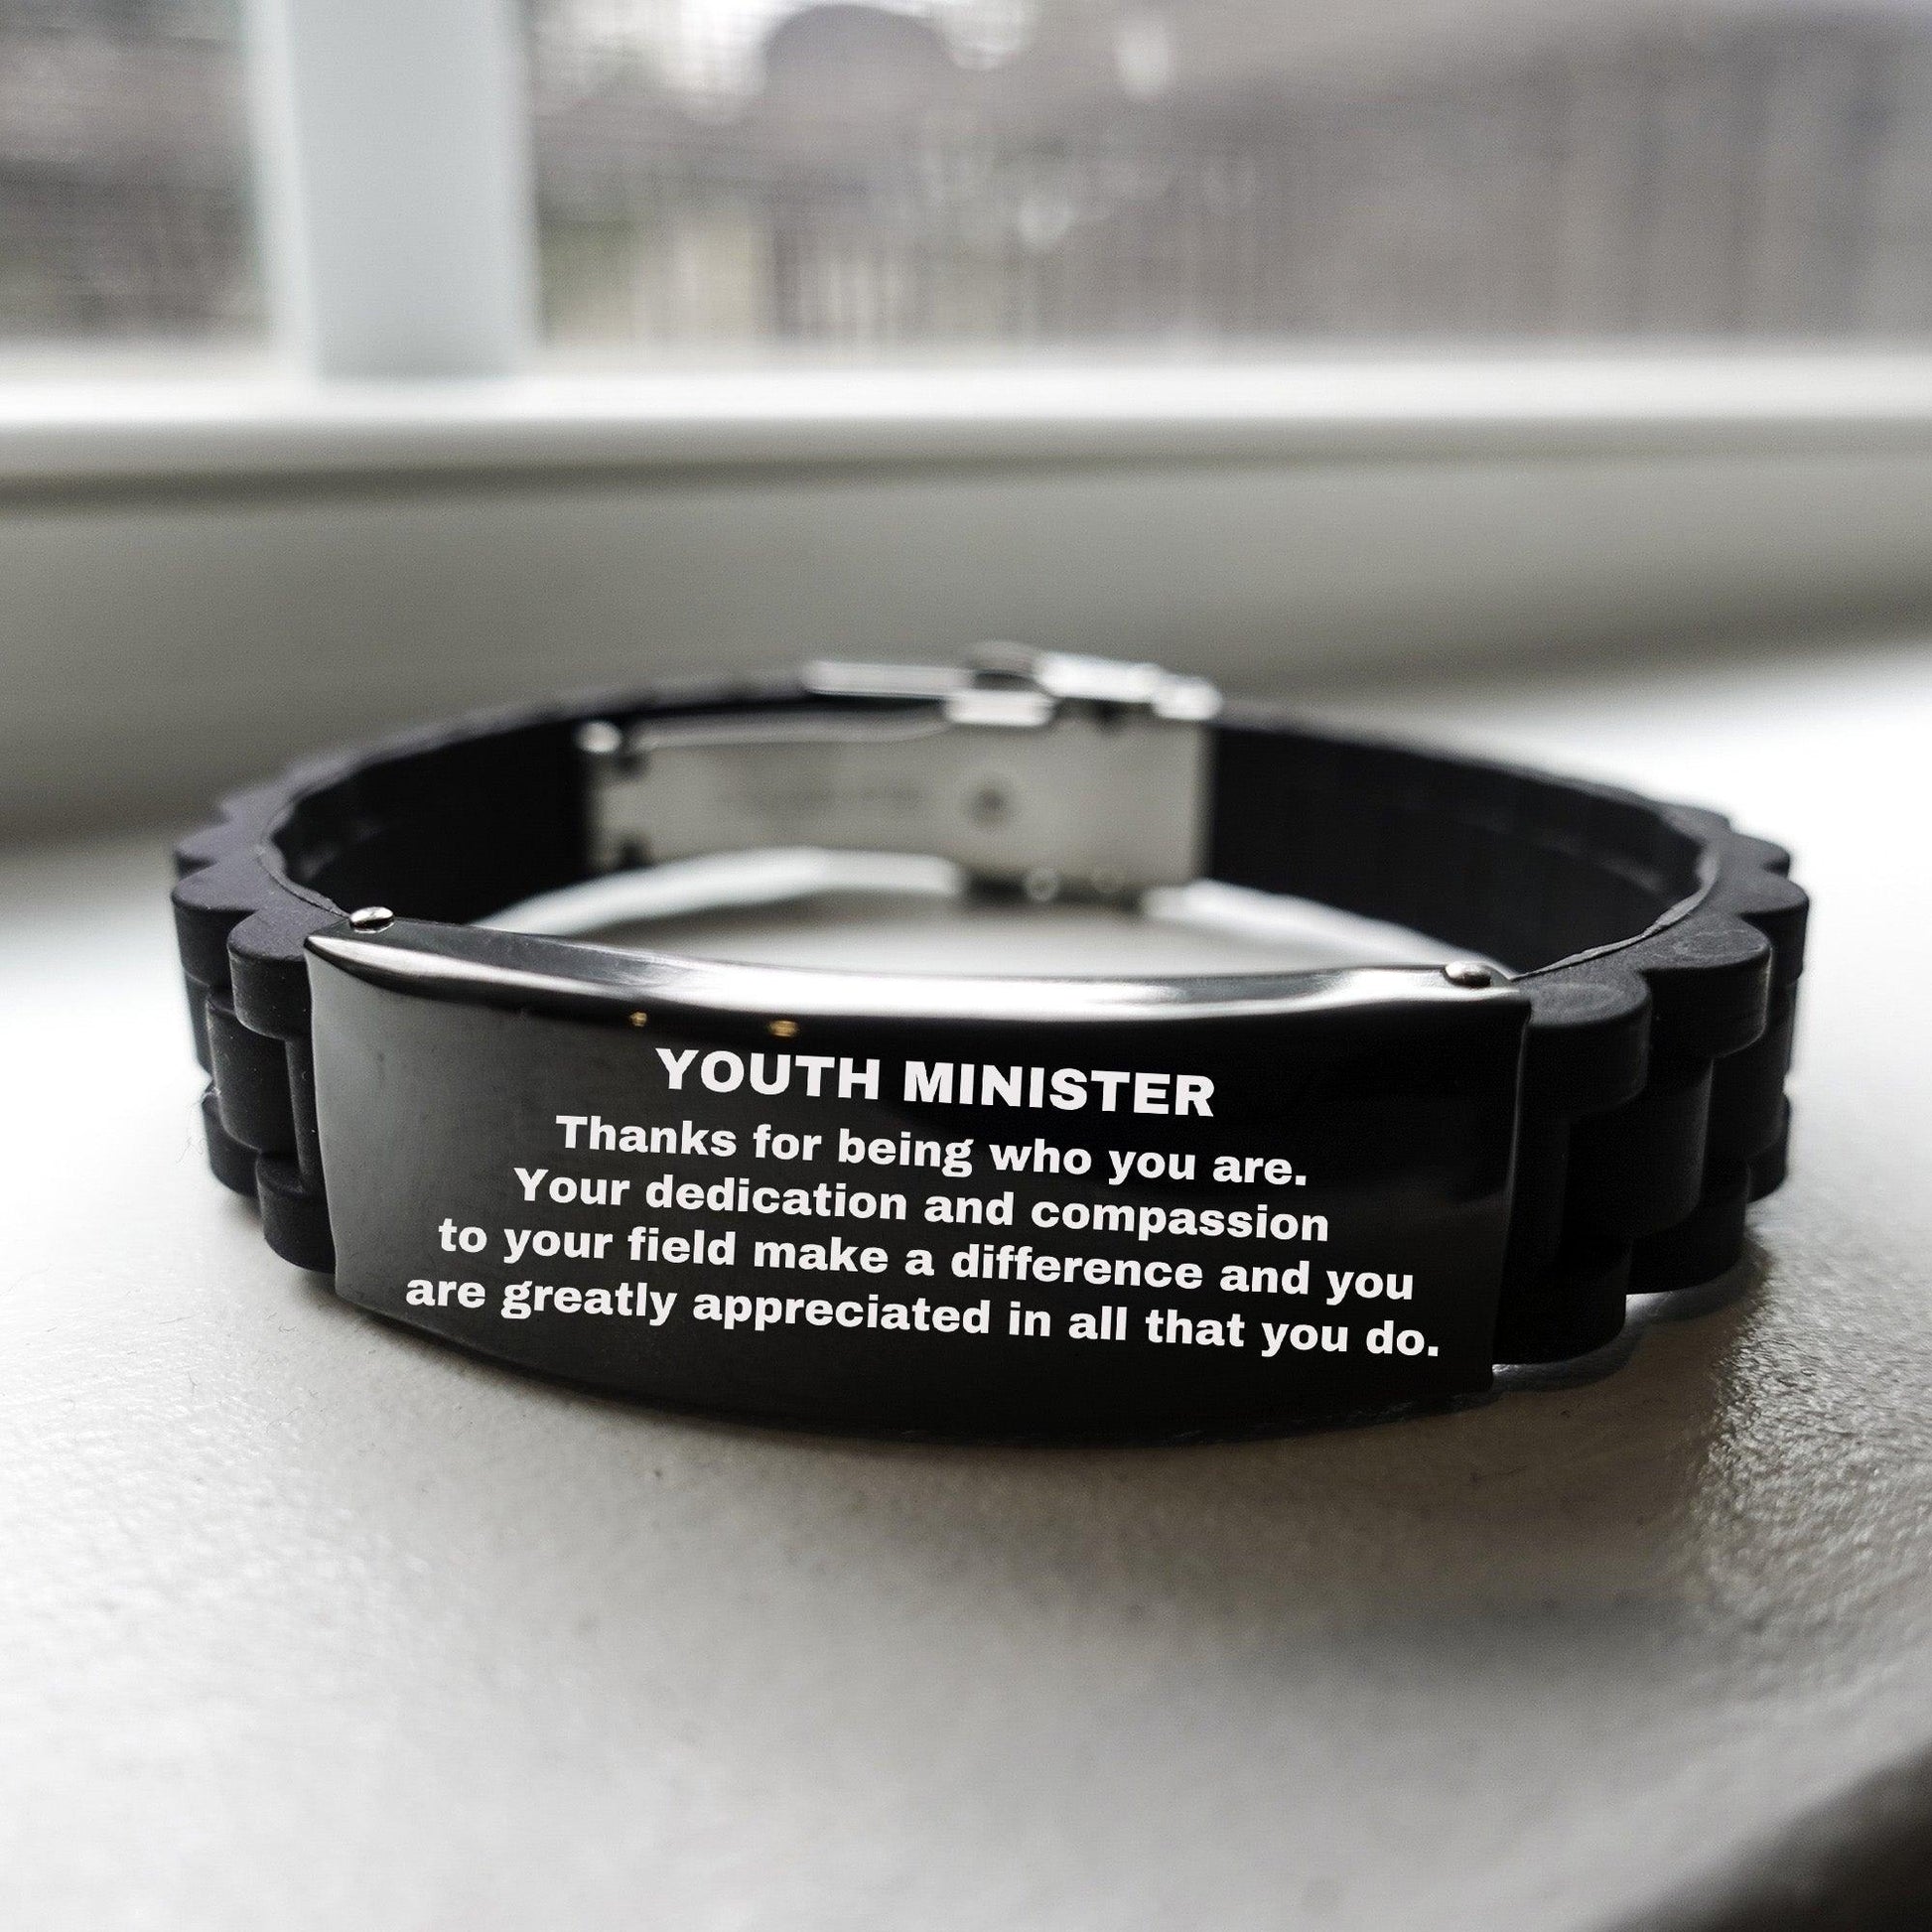 Youth Minister Black Glidelock Clasp Engraved Bracelet - Thanks for being who you are - Birthday Christmas Jewelry Gifts Coworkers Colleague Boss - Mallard Moon Gift Shop